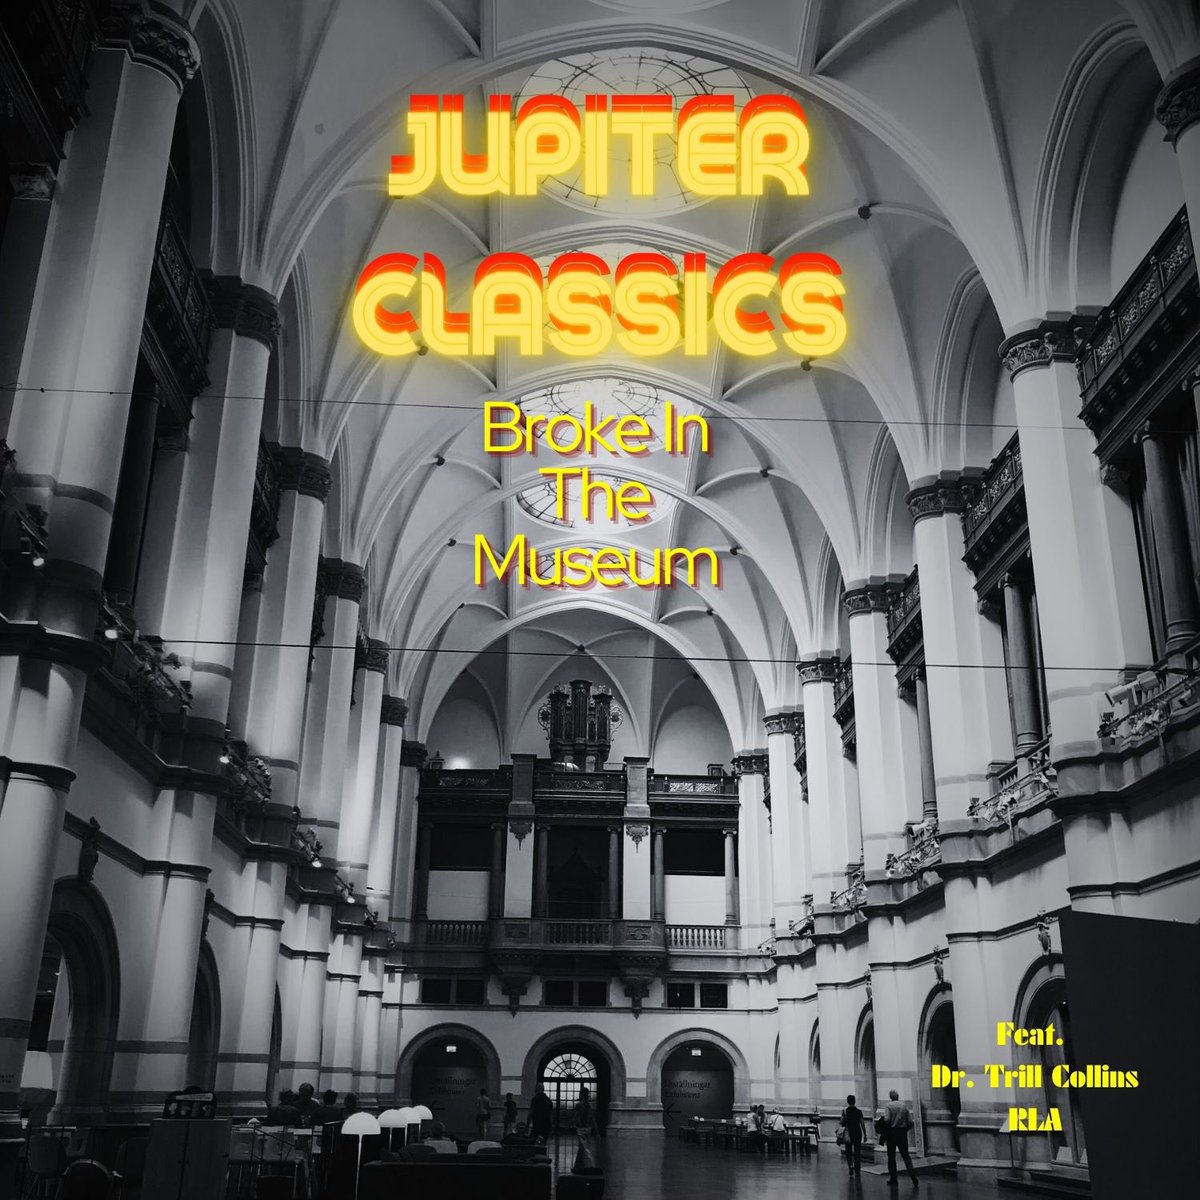 NEW MUSIC UPDATE We Rogues at #JupiterClassics are proud to present our new art house banger “Broke In The Museum” ft. @TuckerDaleBooth & @itsaboutgood Now playing wherever you do your streaming Links in the comment thread #RappersDontGolf